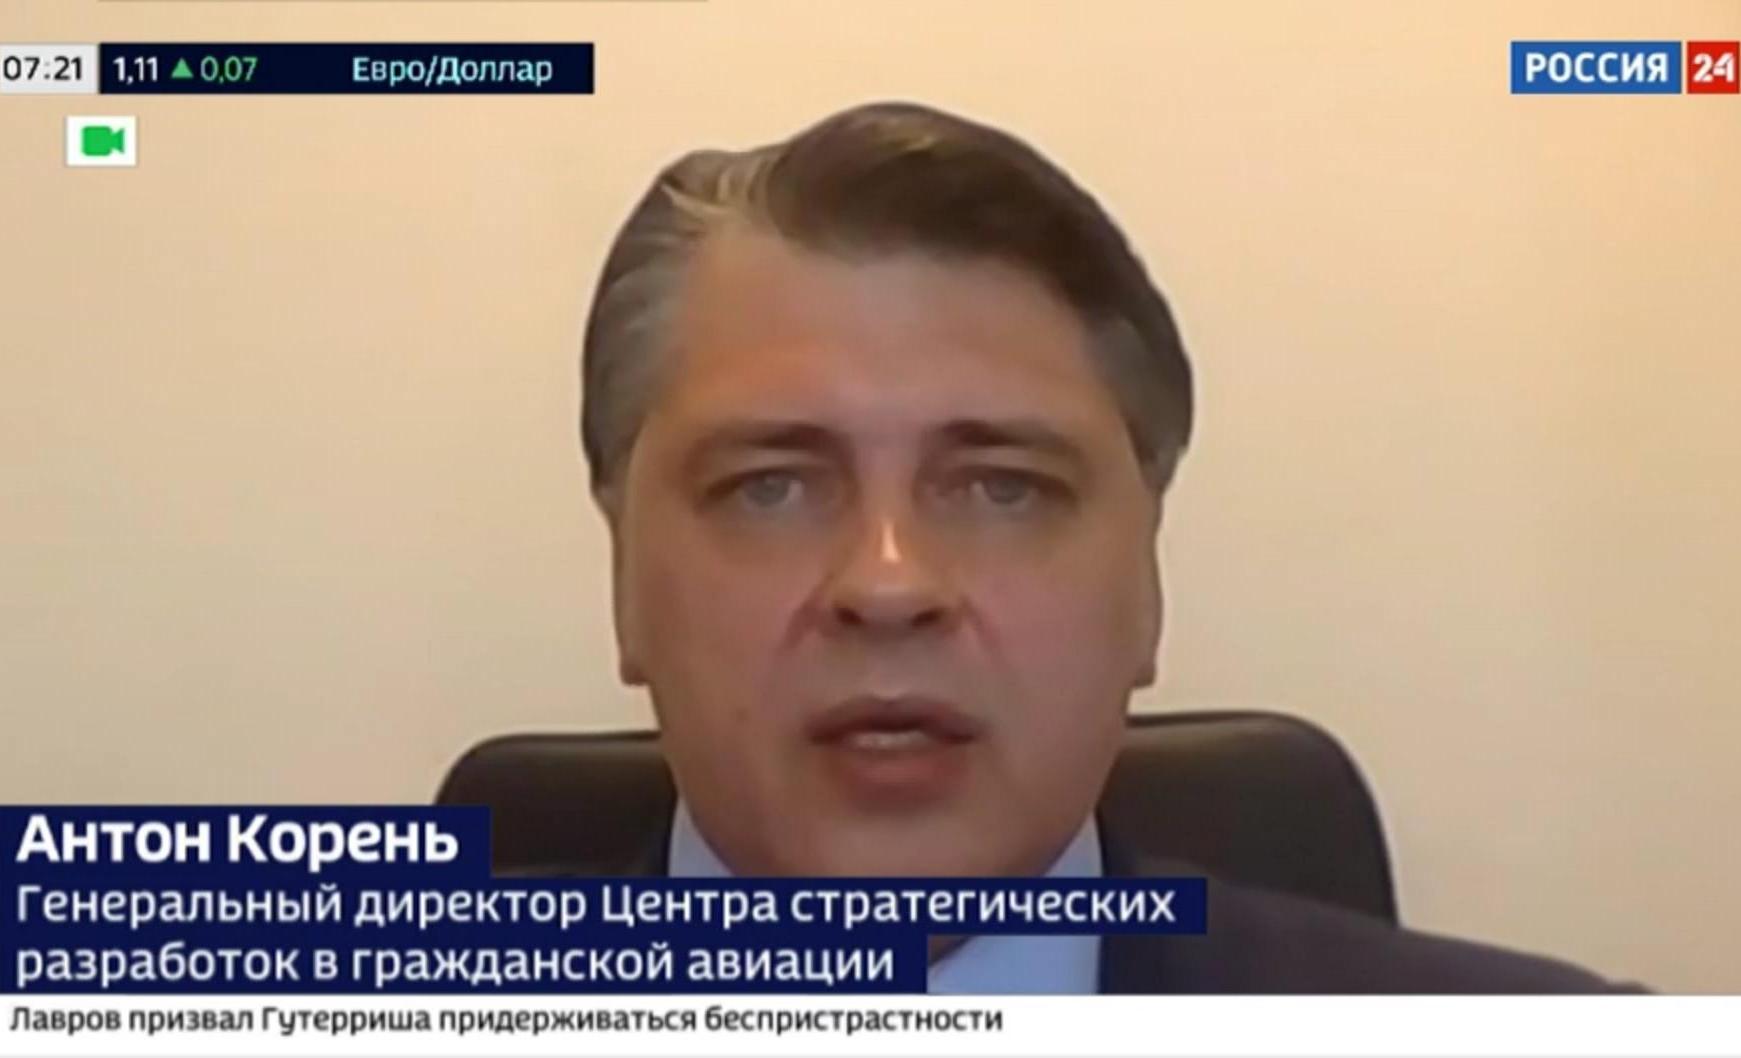 Anton Koren, head of the TSC Consortium, on the air of Russia 24 TV channel on import substitution in the aircraft industry